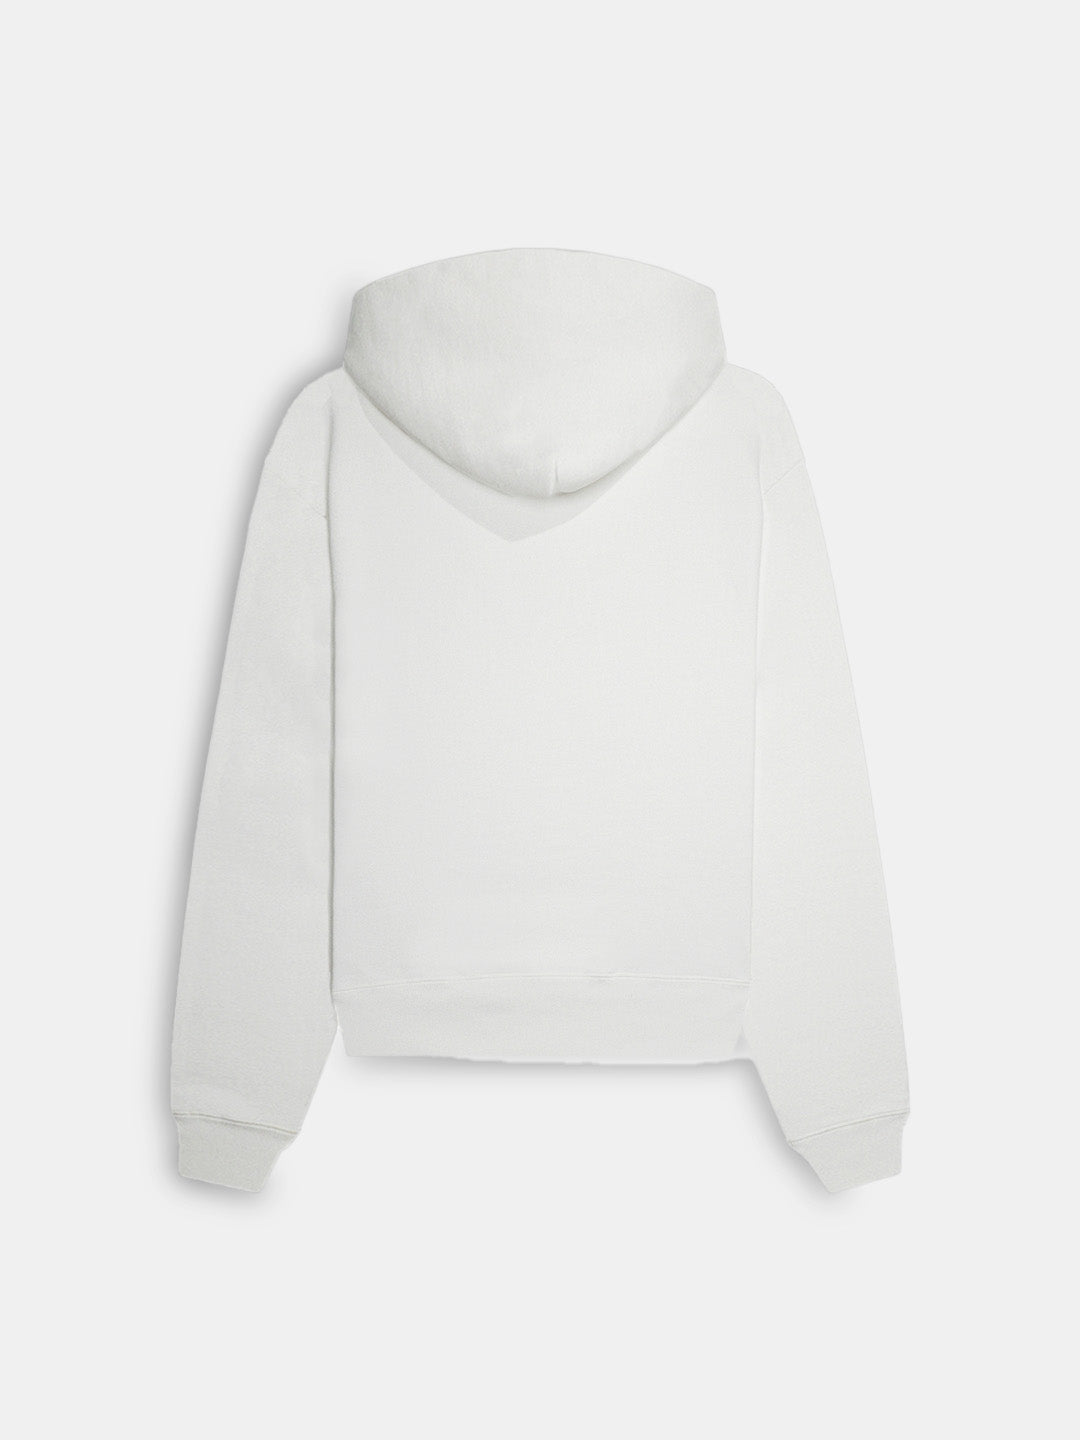 The Shop By Hand Fleece Hoodie Ivory - Back